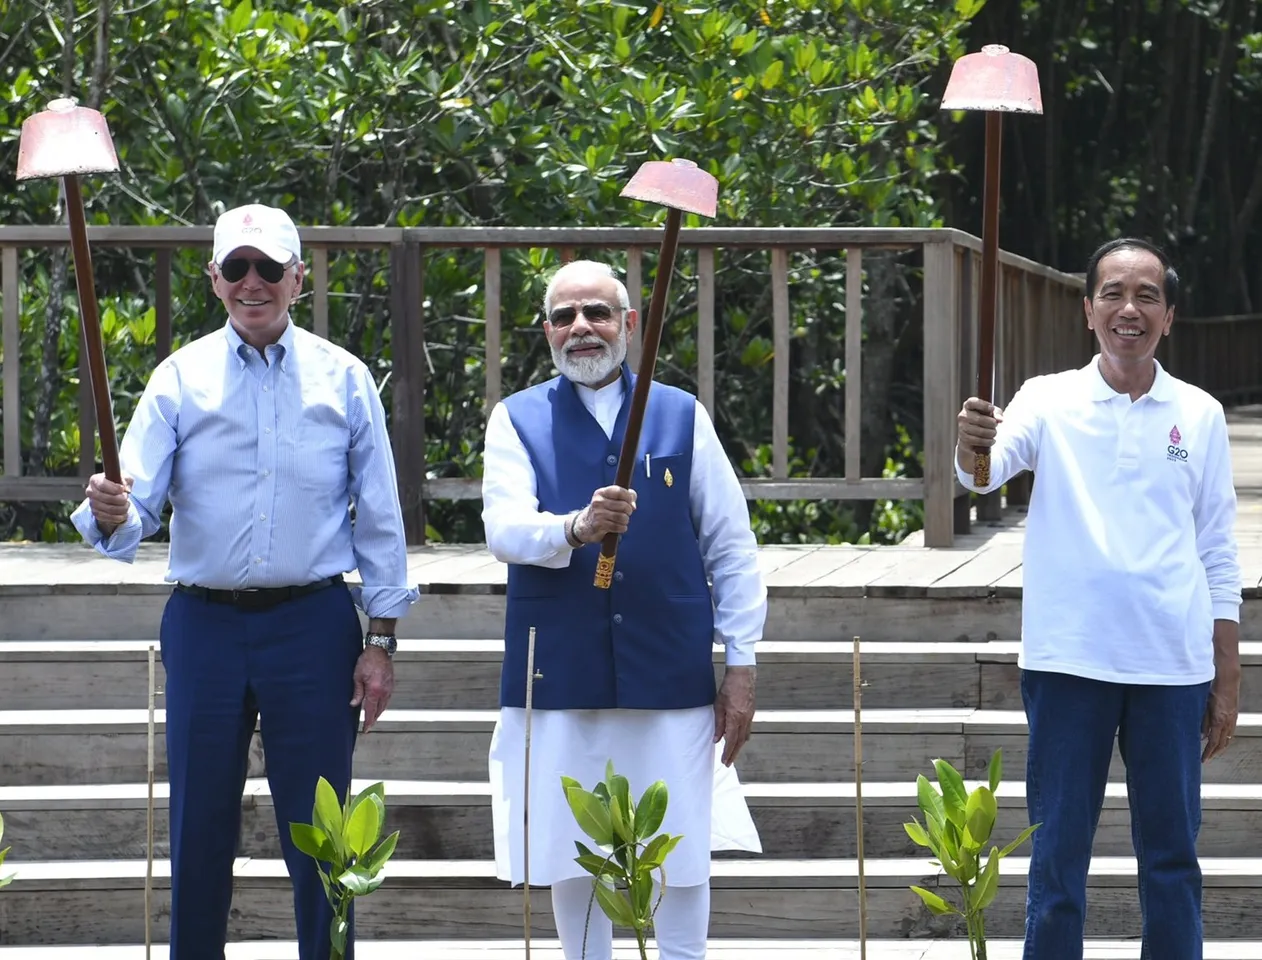 G20 Summit: PM Modi plants mangroves with world leaders in Bali